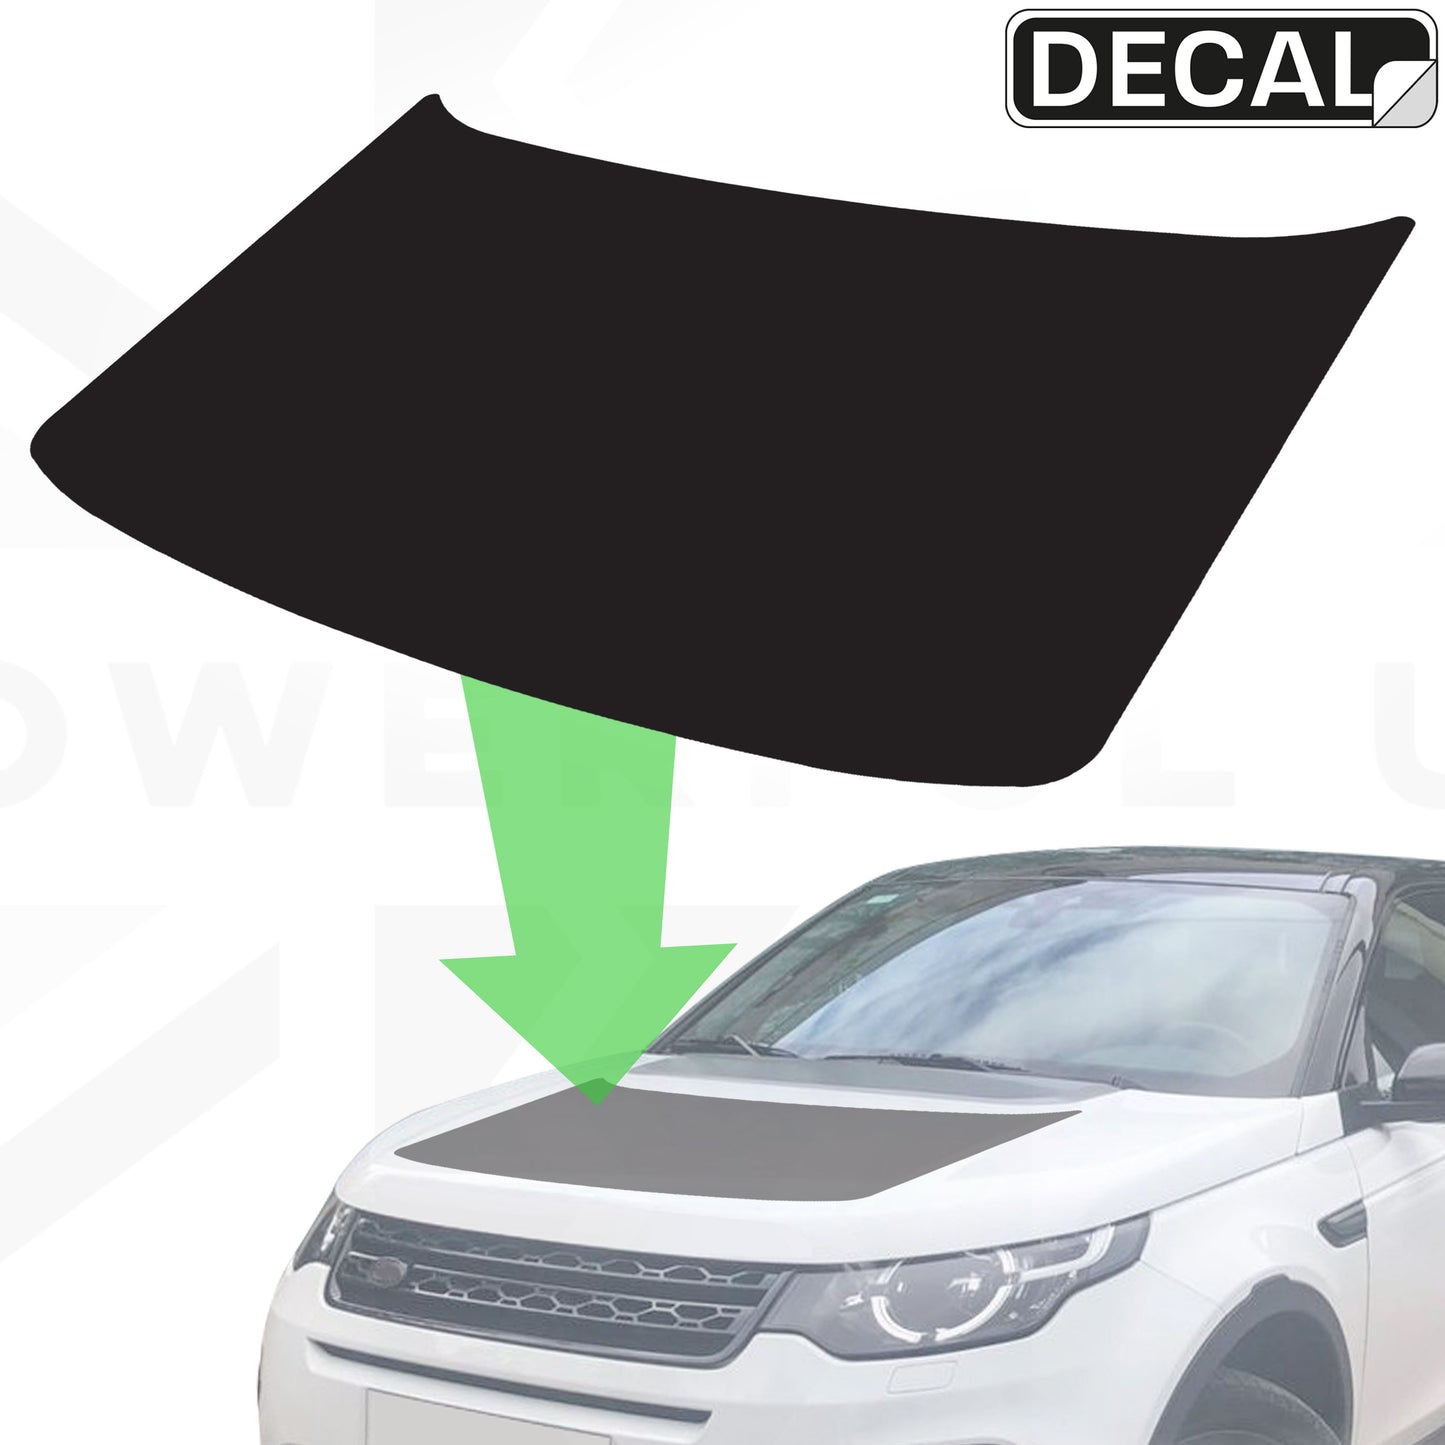 Bonnet Decal Set for Land Rover Discovery Sport - Blank Design